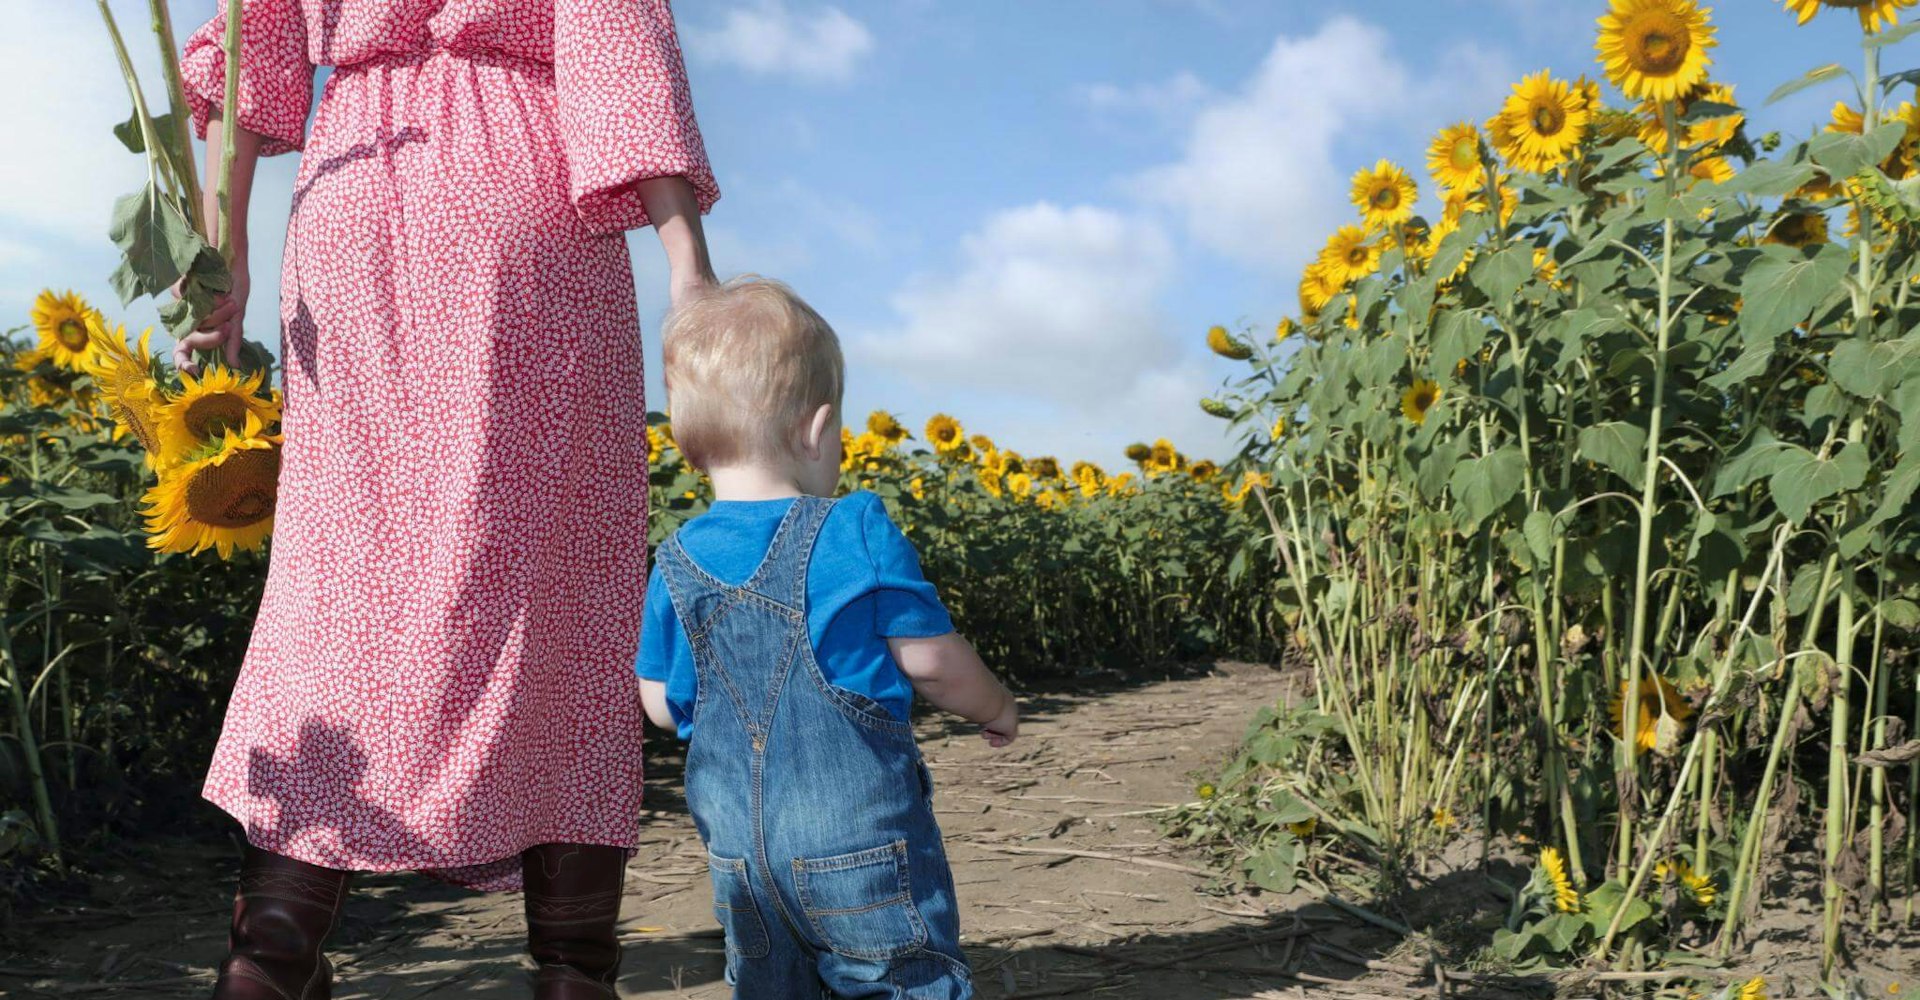 Boy and Mother in Sunflower Field